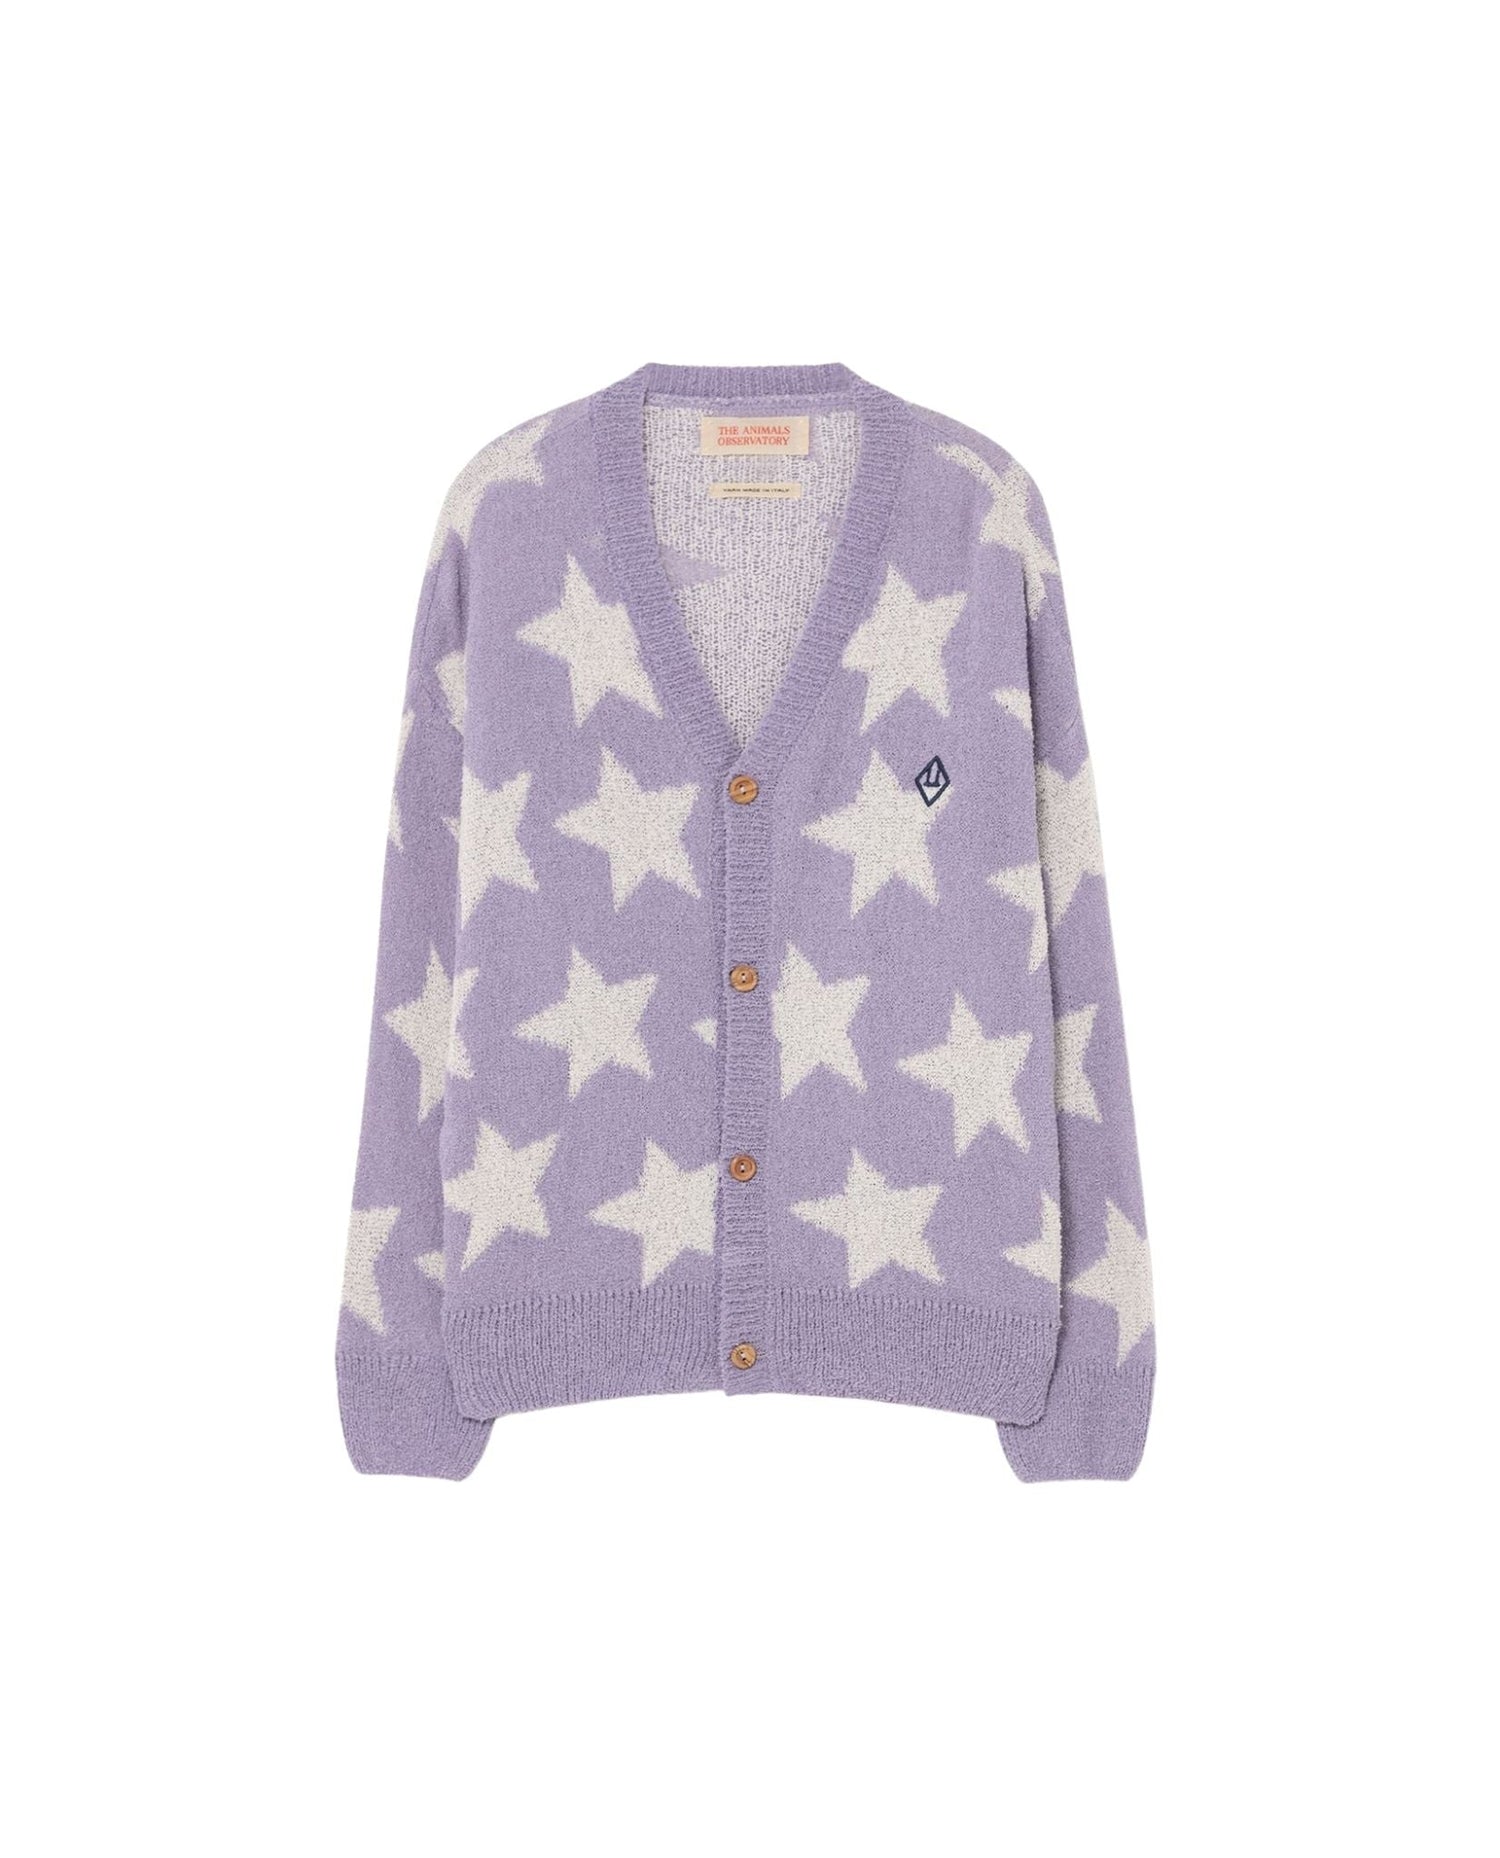 Stars racoon Cardigan Lavender Knitwear The Animals Observatory 